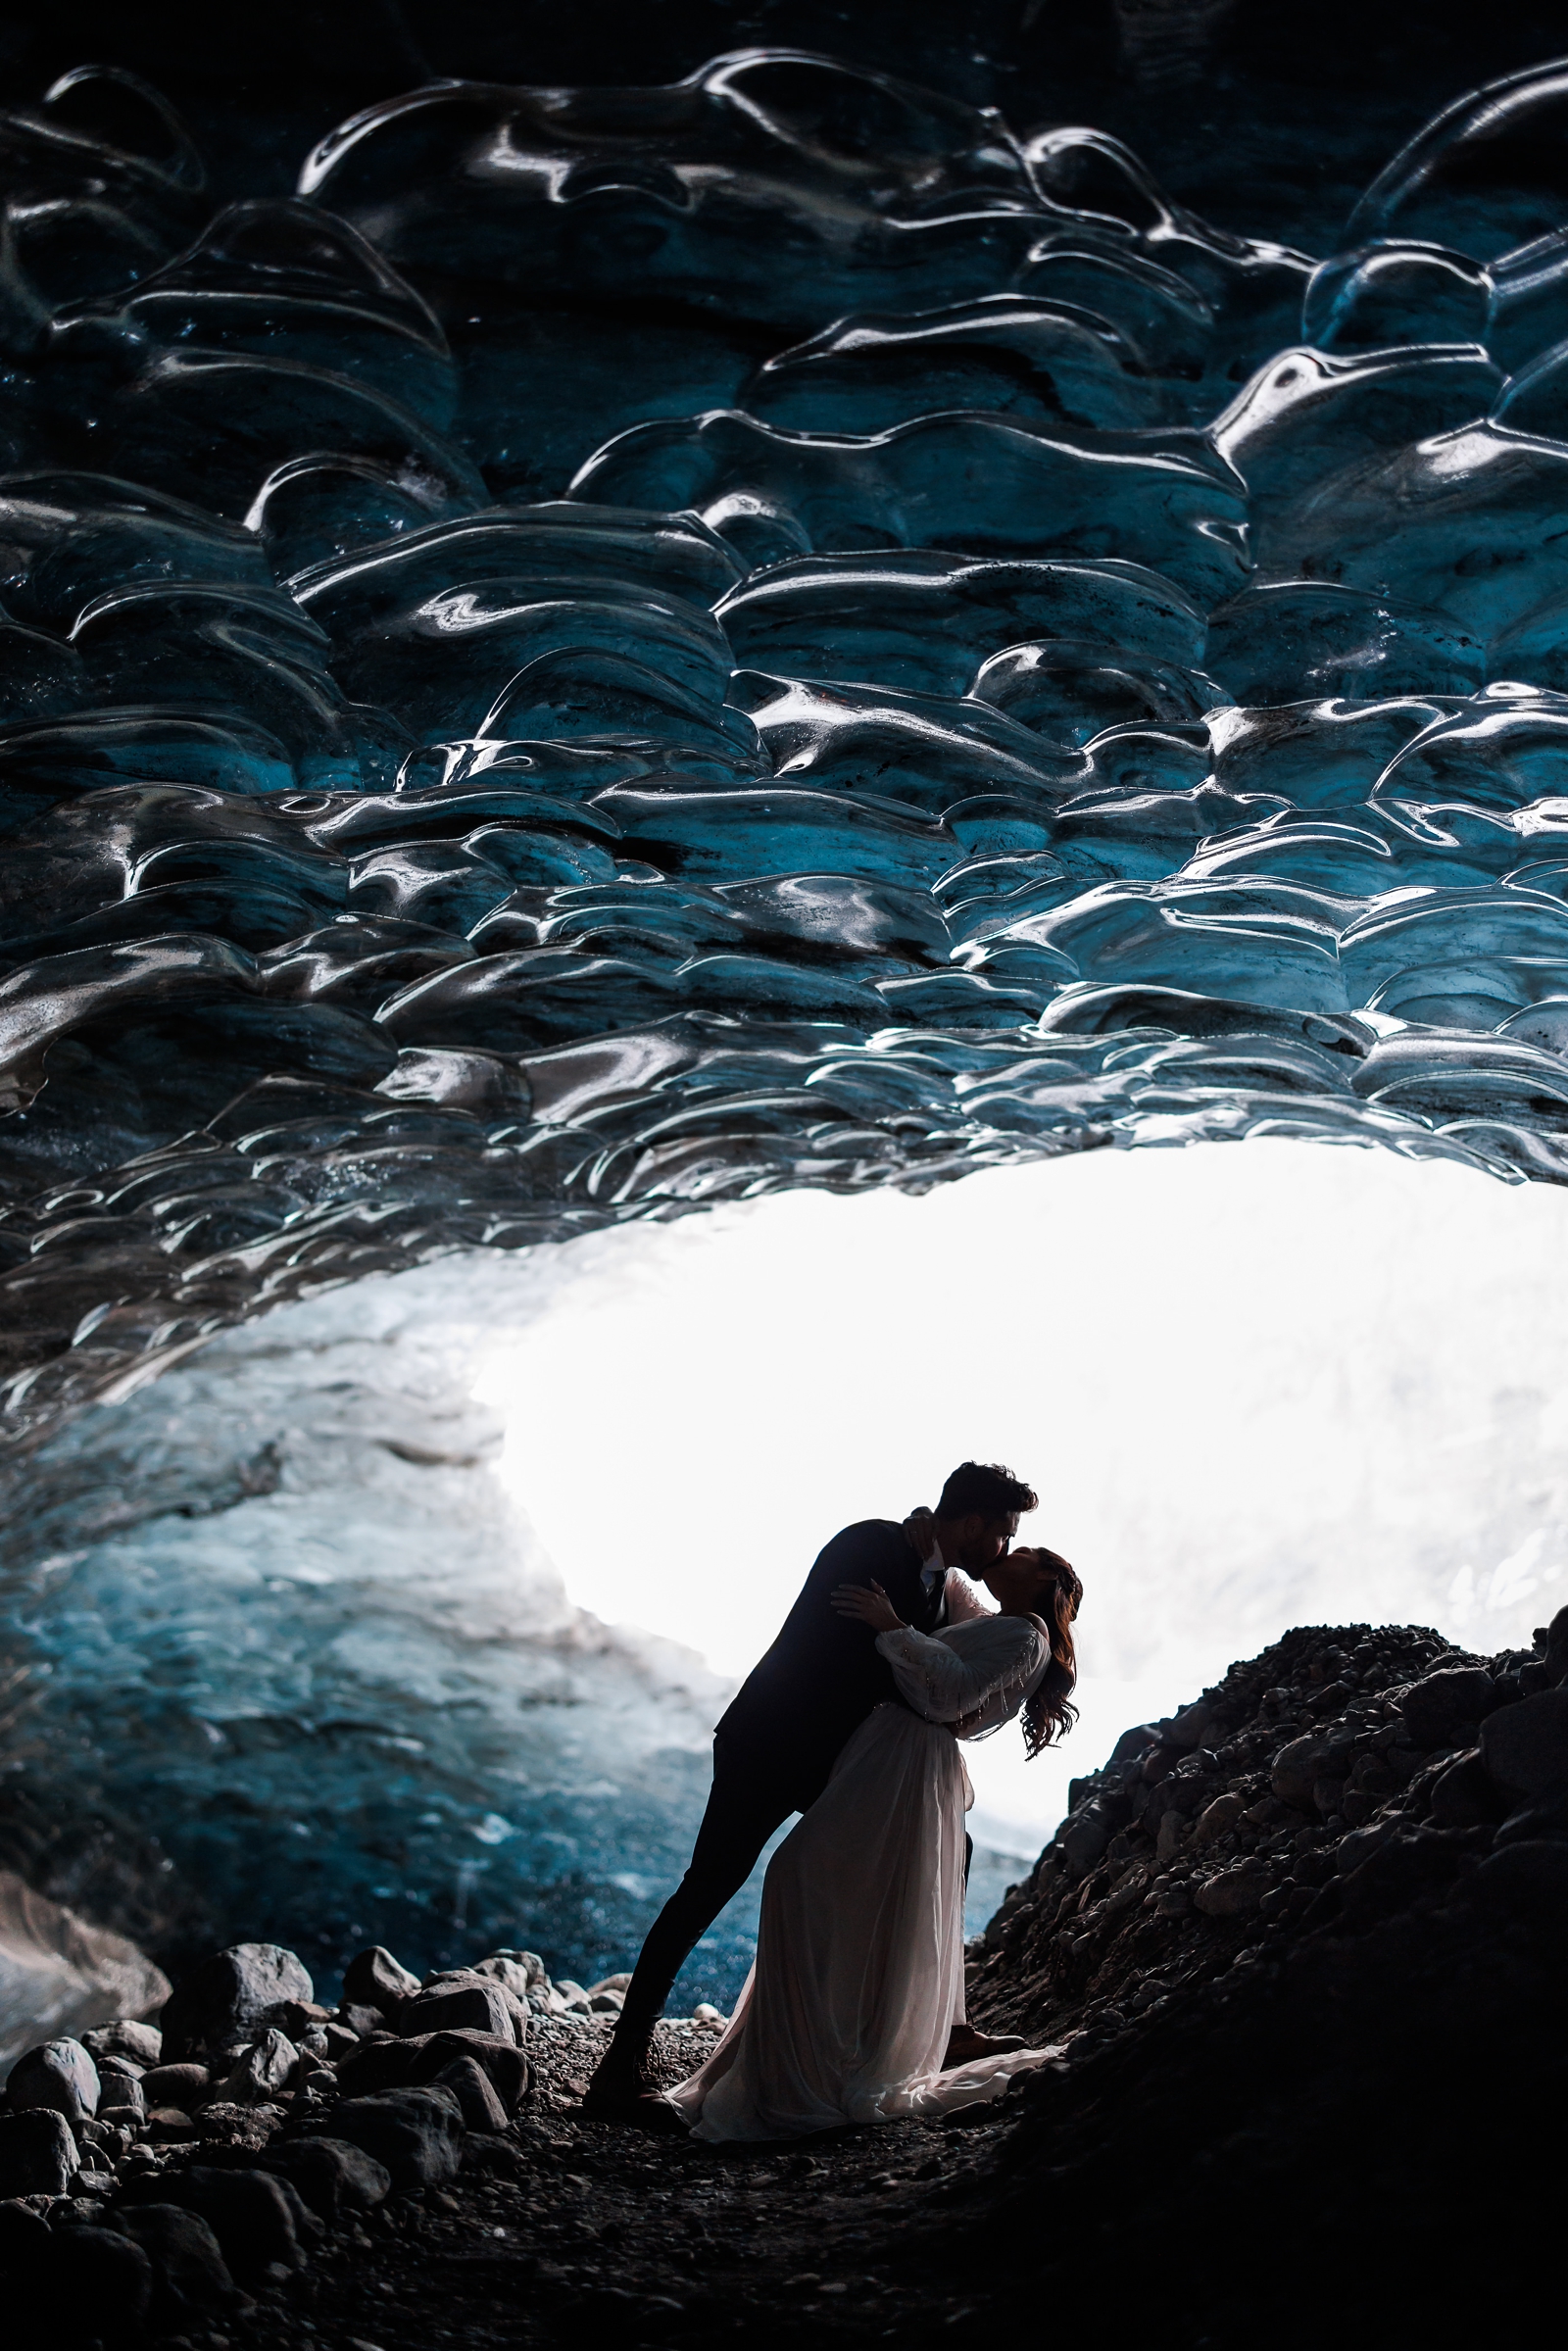 This Iceland glacier cave was an epic venue for this eloping couple.